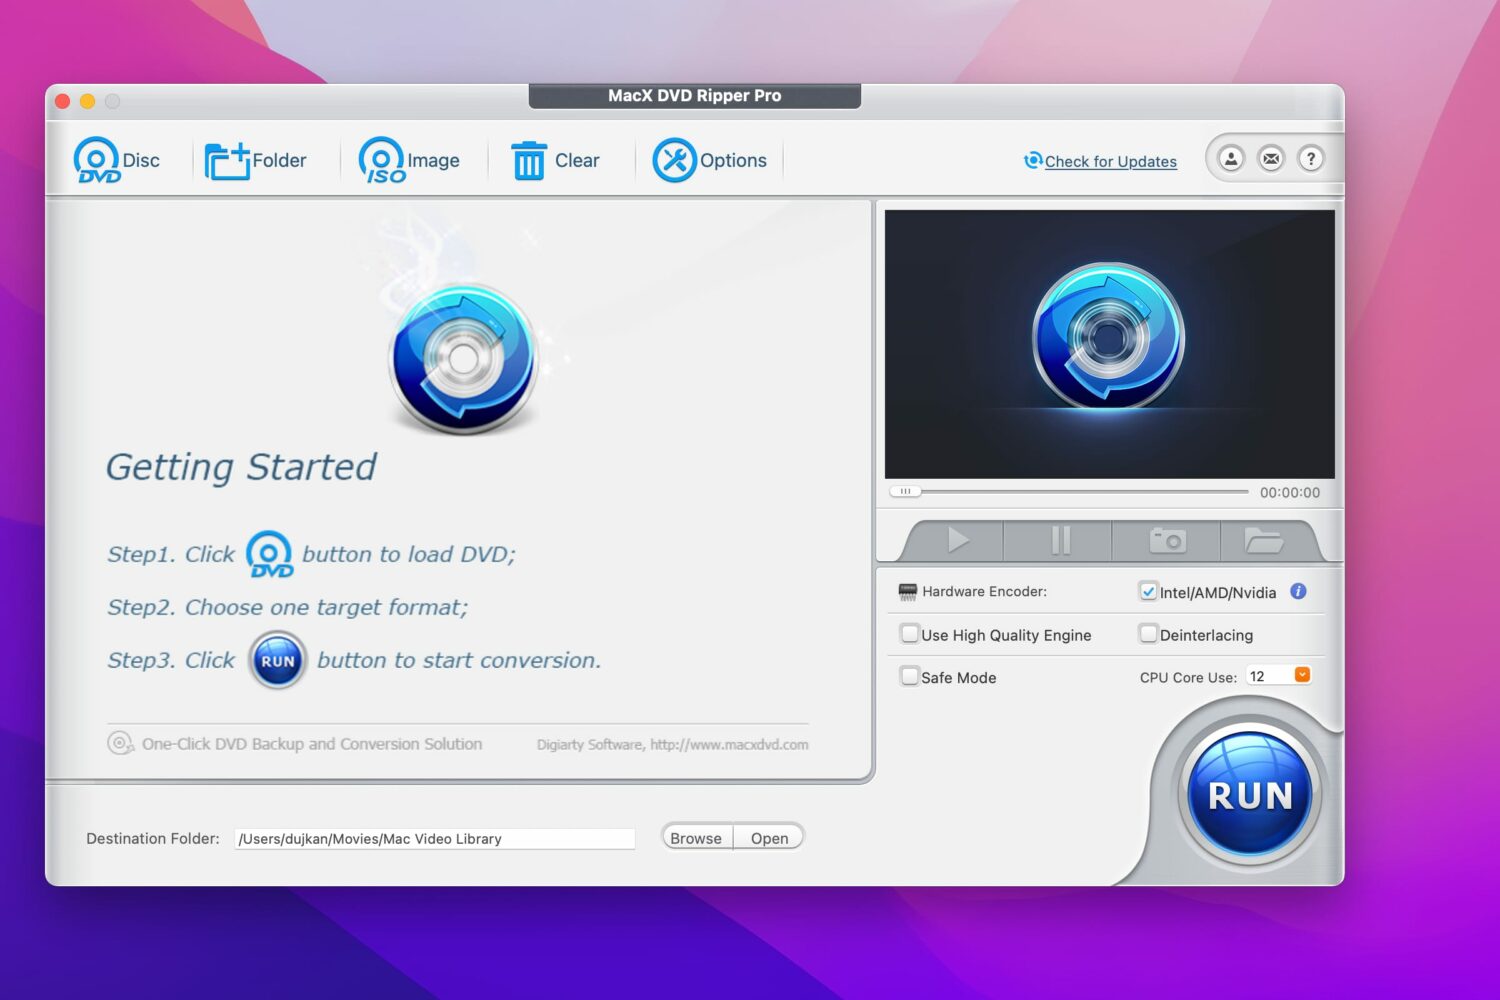 MacX DVD Ripper Pro for macOS with the home screen shown